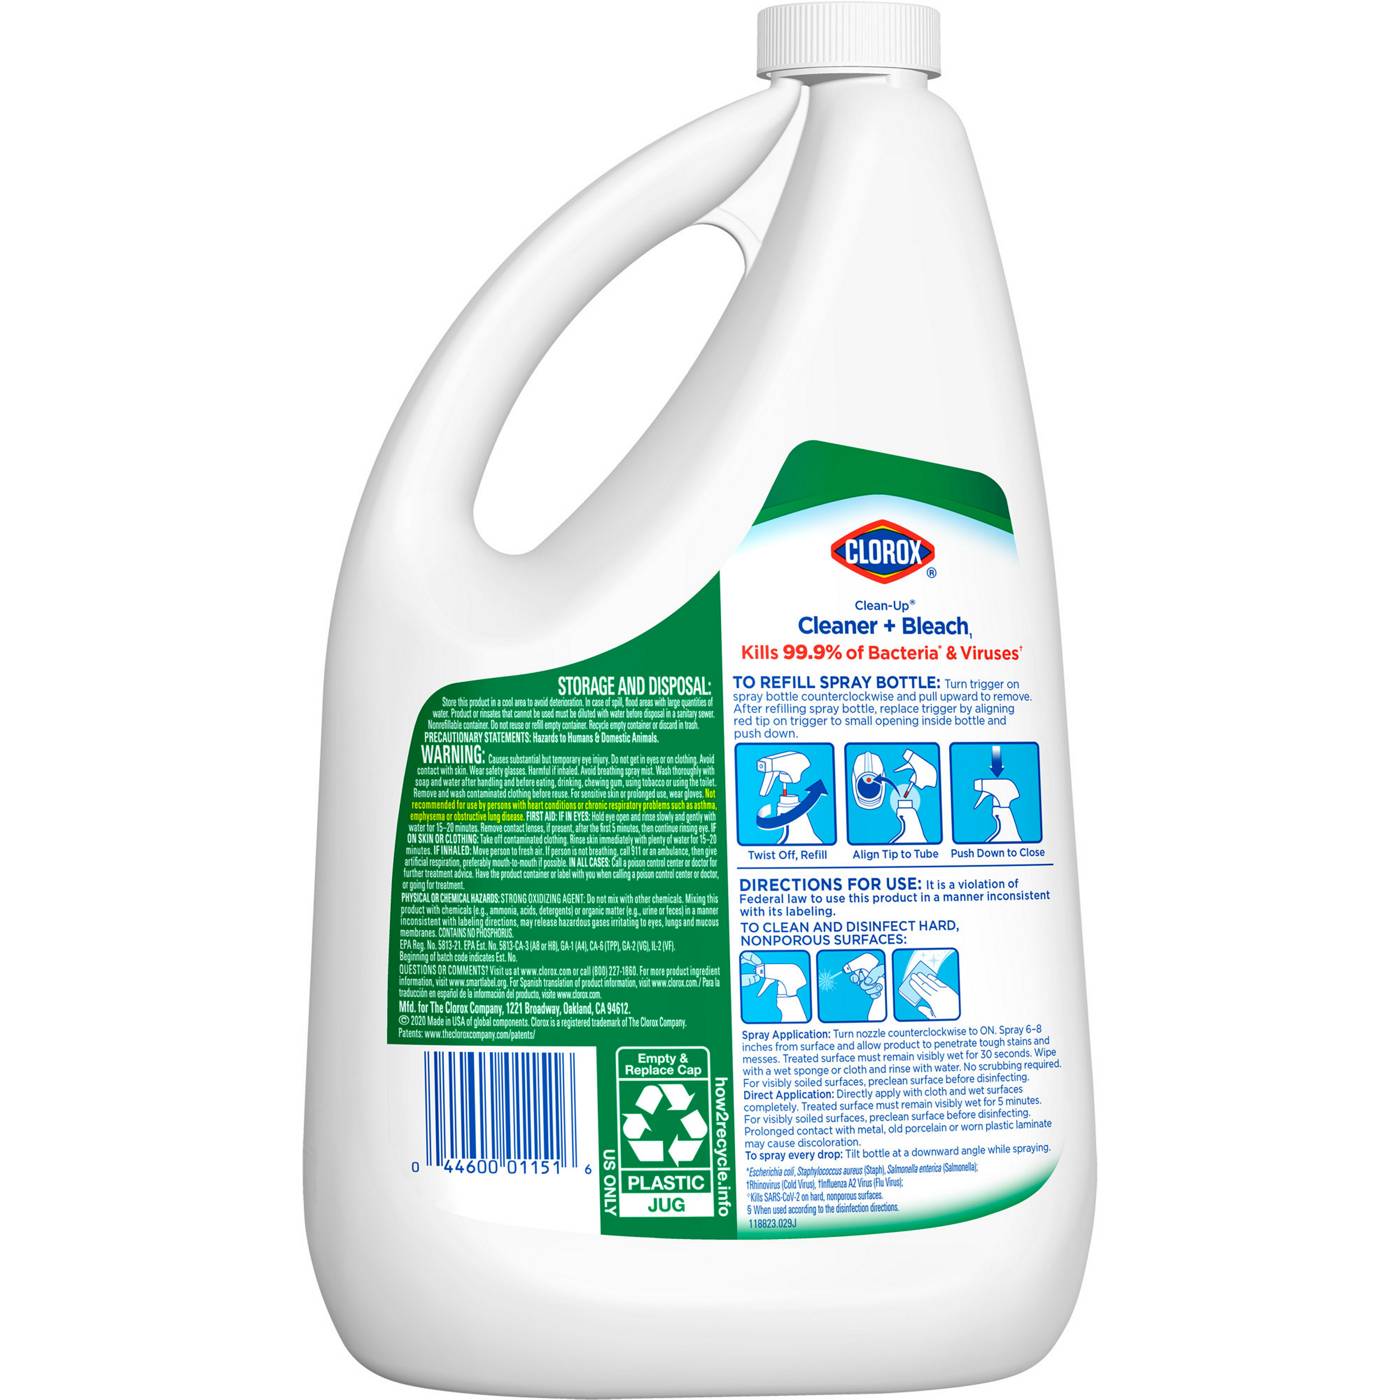 Clorox Clean-Up Cleaner & Bleach; image 13 of 13